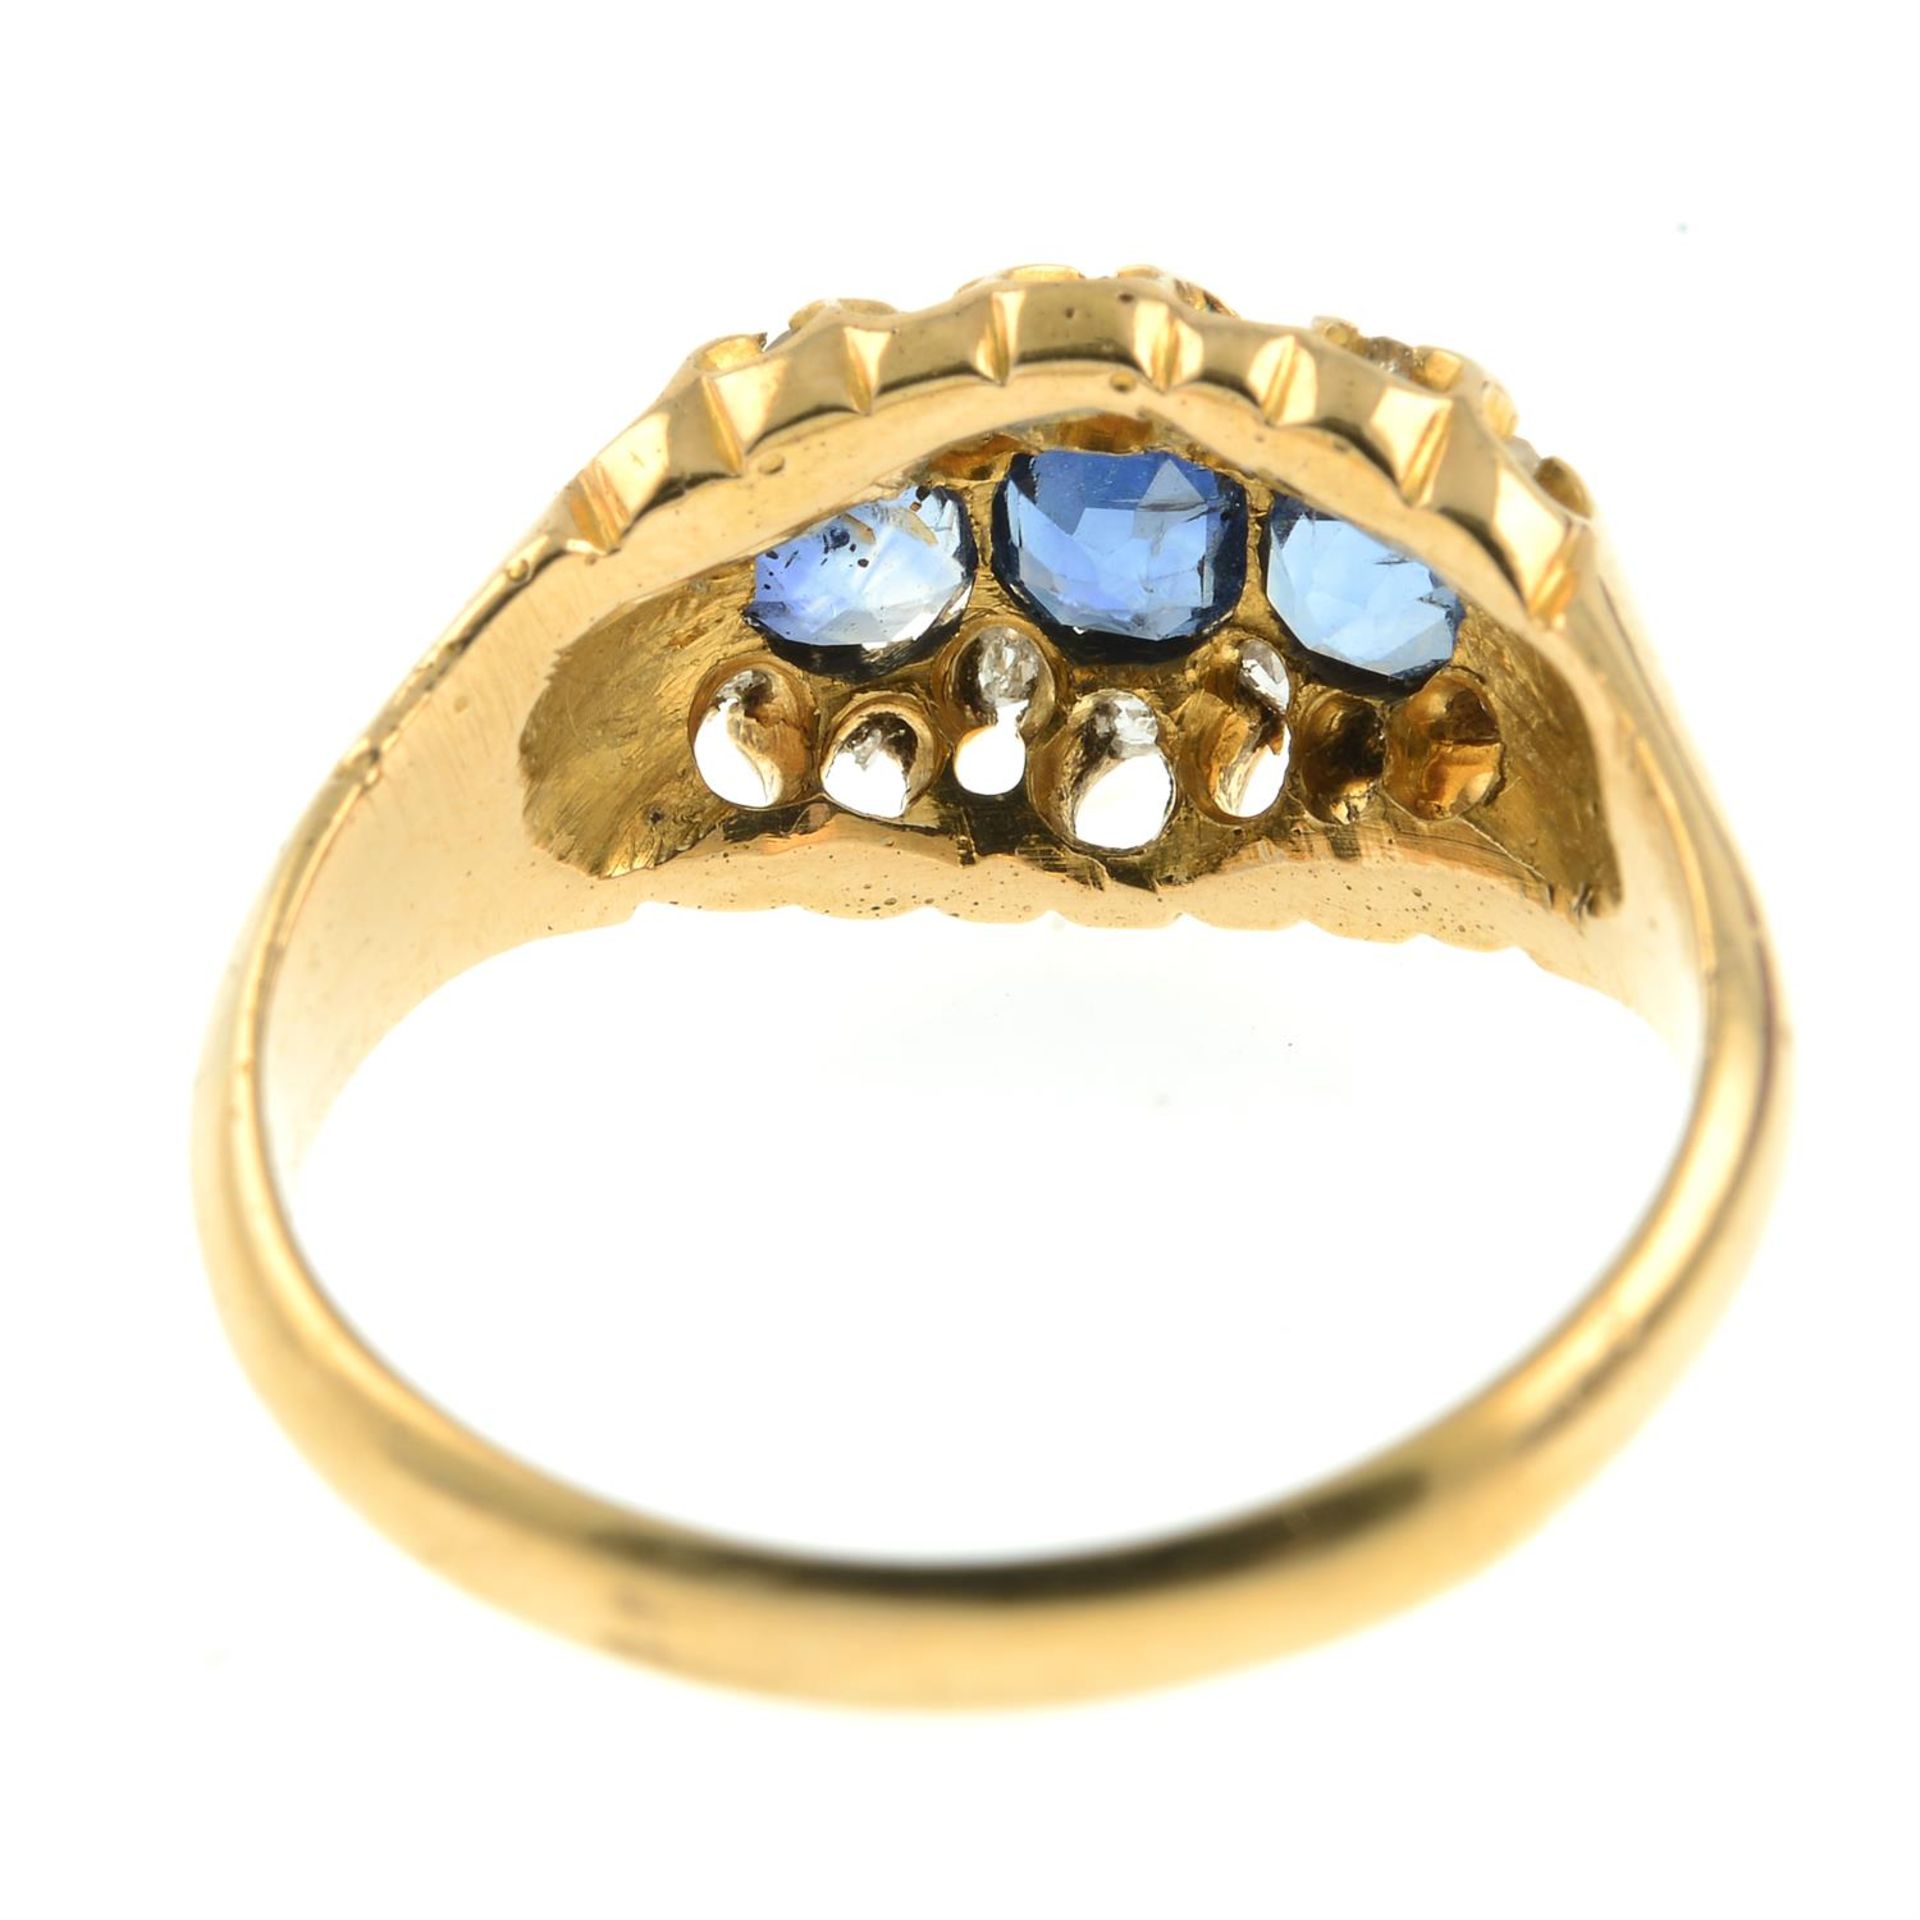 A late Victorian 18ct gold sapphire three-stone ring, with rose and old-cut diamond surround. - Image 4 of 6